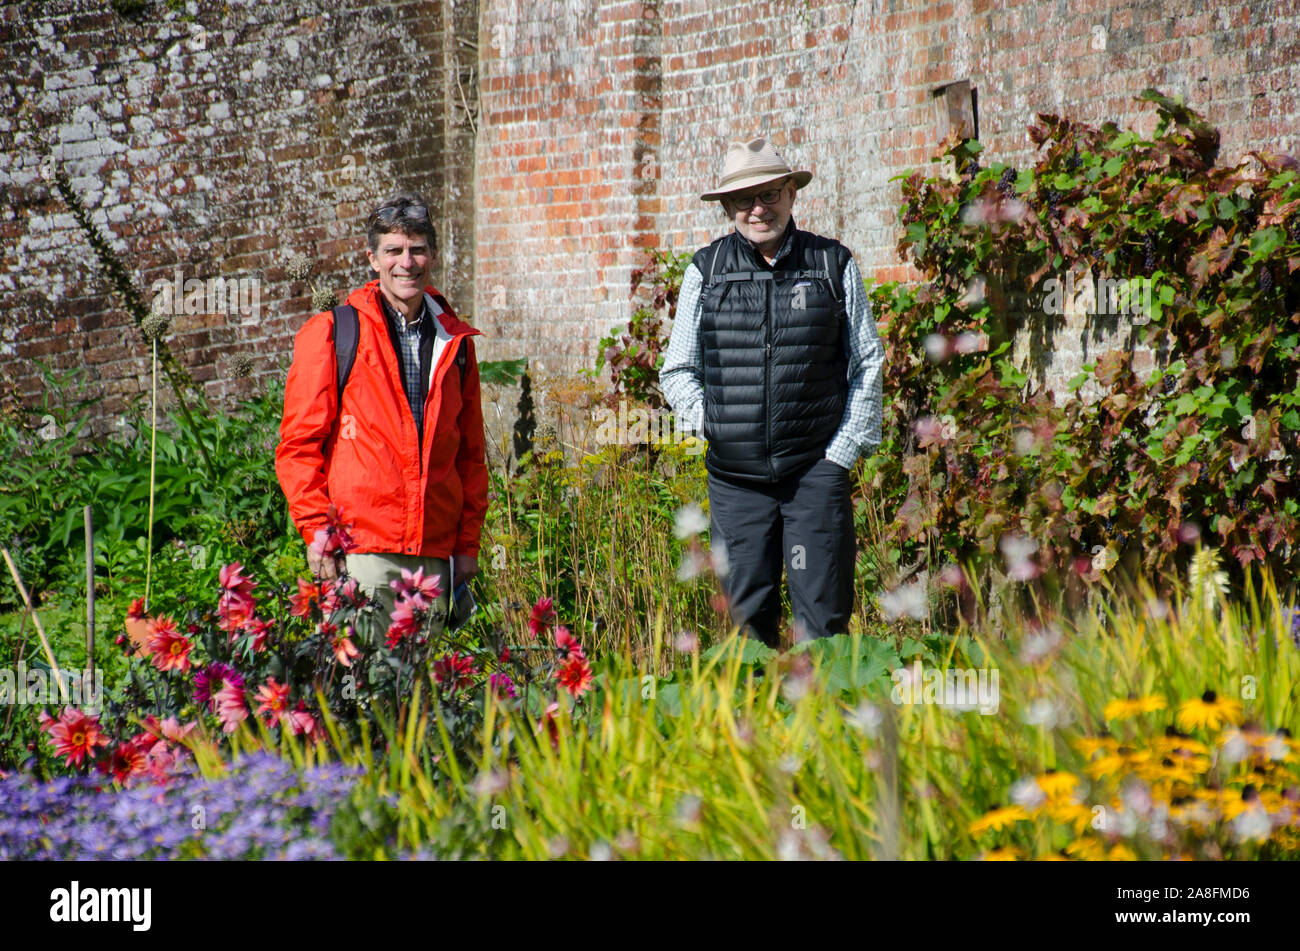 Friends on tour: Two older men wearing hats stand in the blooming flower gardens  at Stourhead gardens, in Wiltshire UK Stock Photo